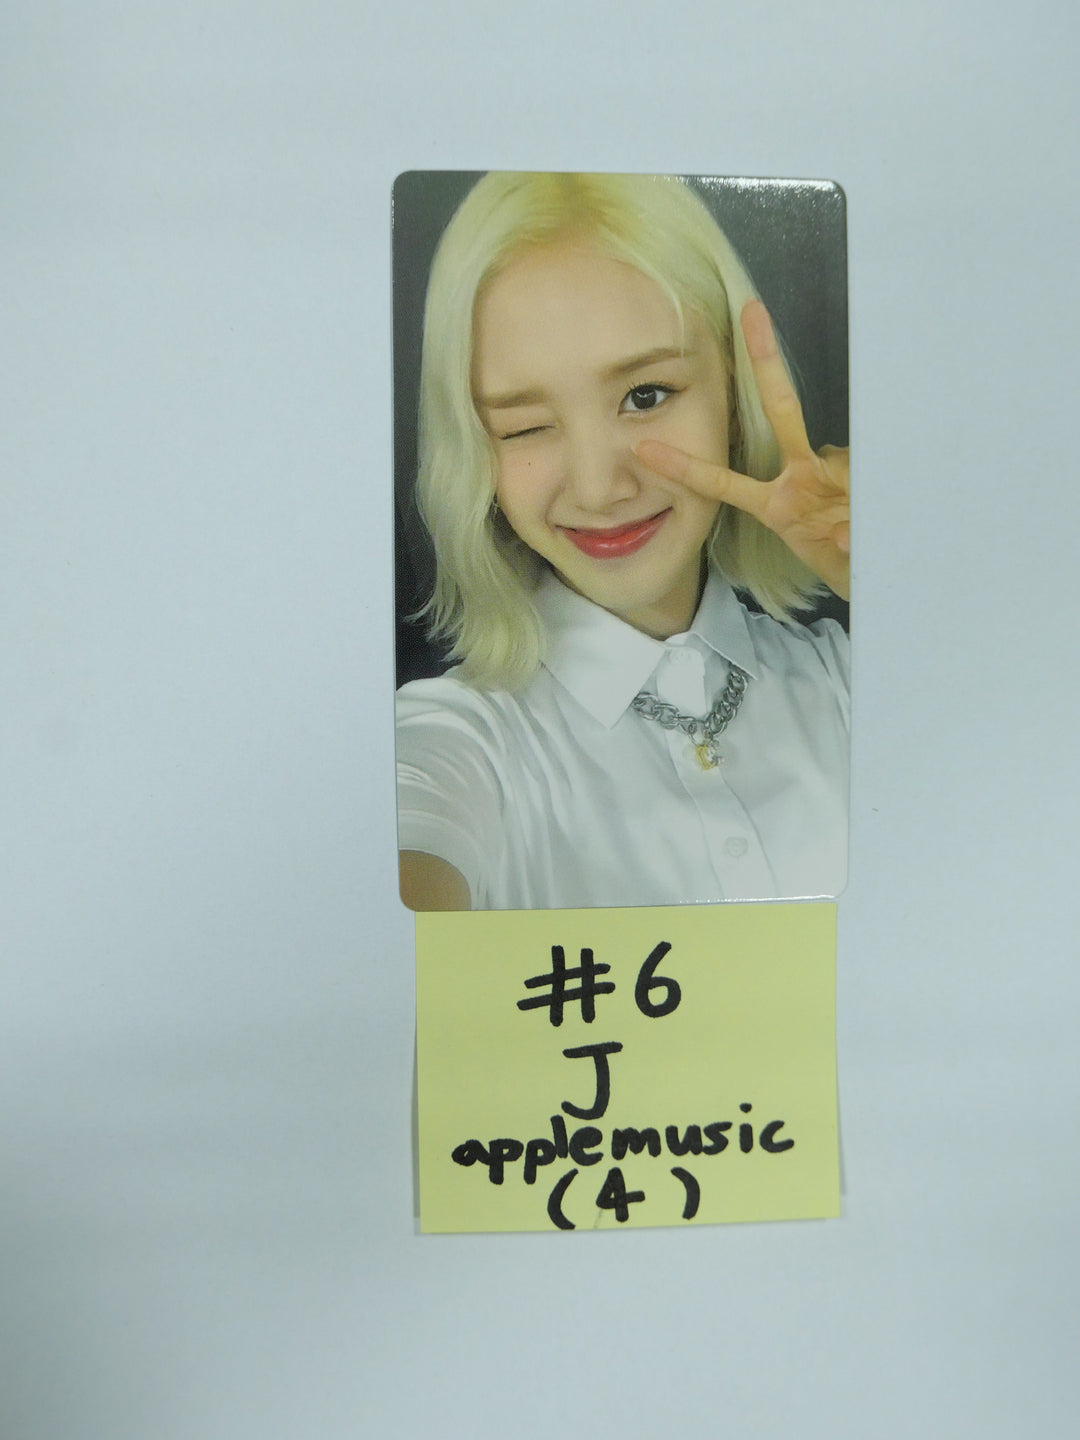 StayC 'STEREOTYPE' - Applemusic Fansign Event Photocard Round 4